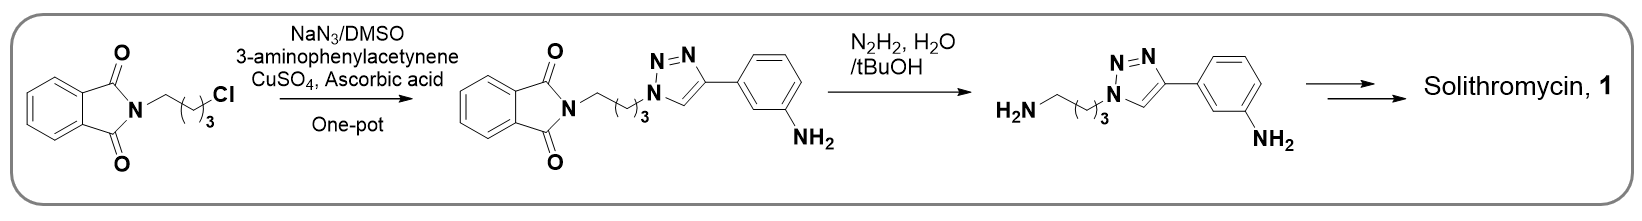 Synthesis of side chain of Solithromycin